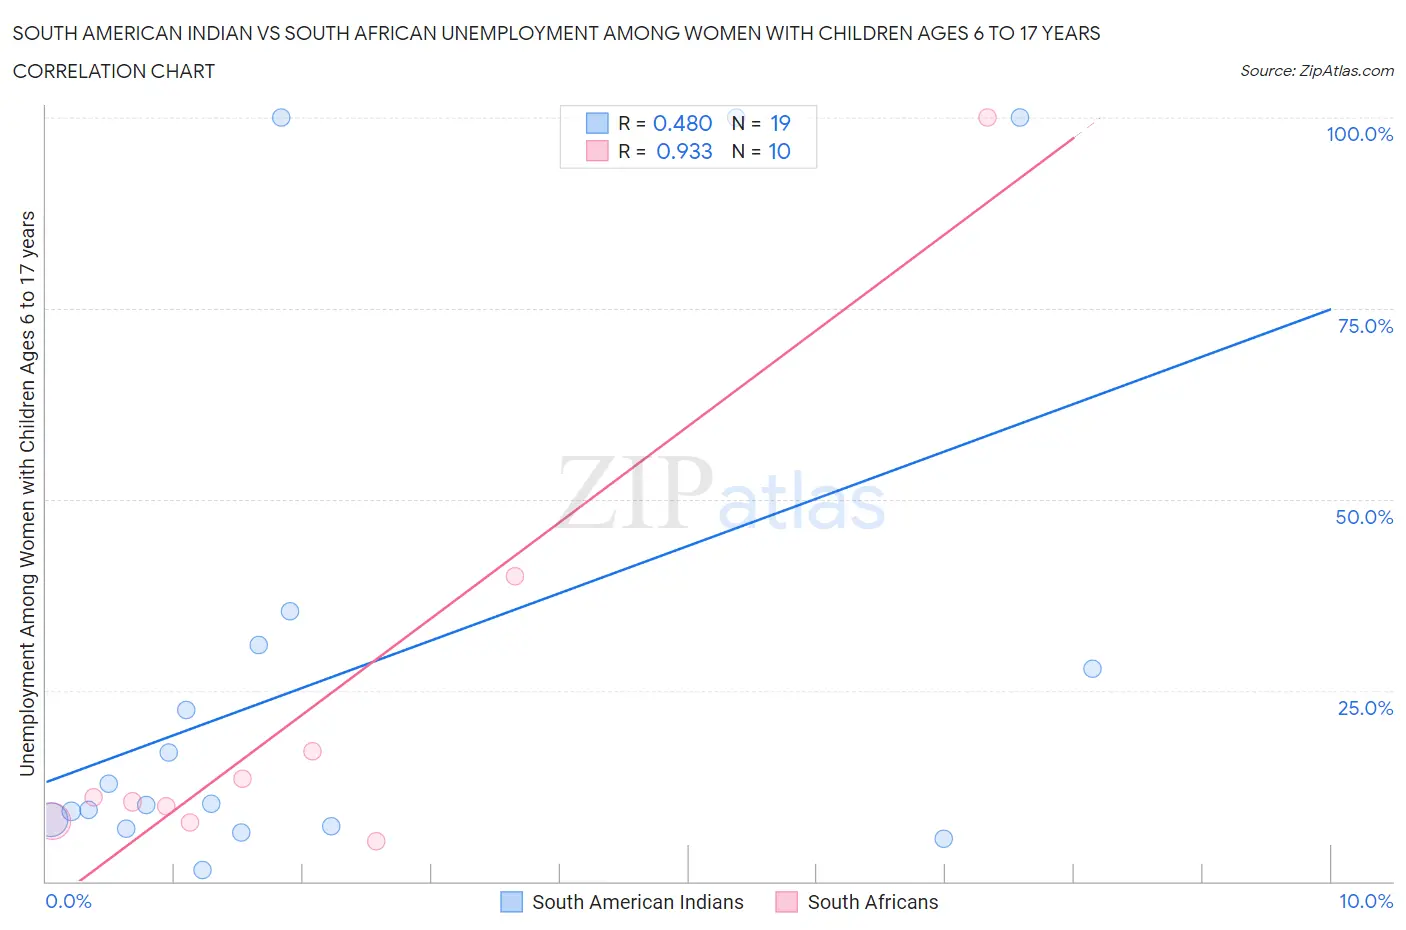 South American Indian vs South African Unemployment Among Women with Children Ages 6 to 17 years